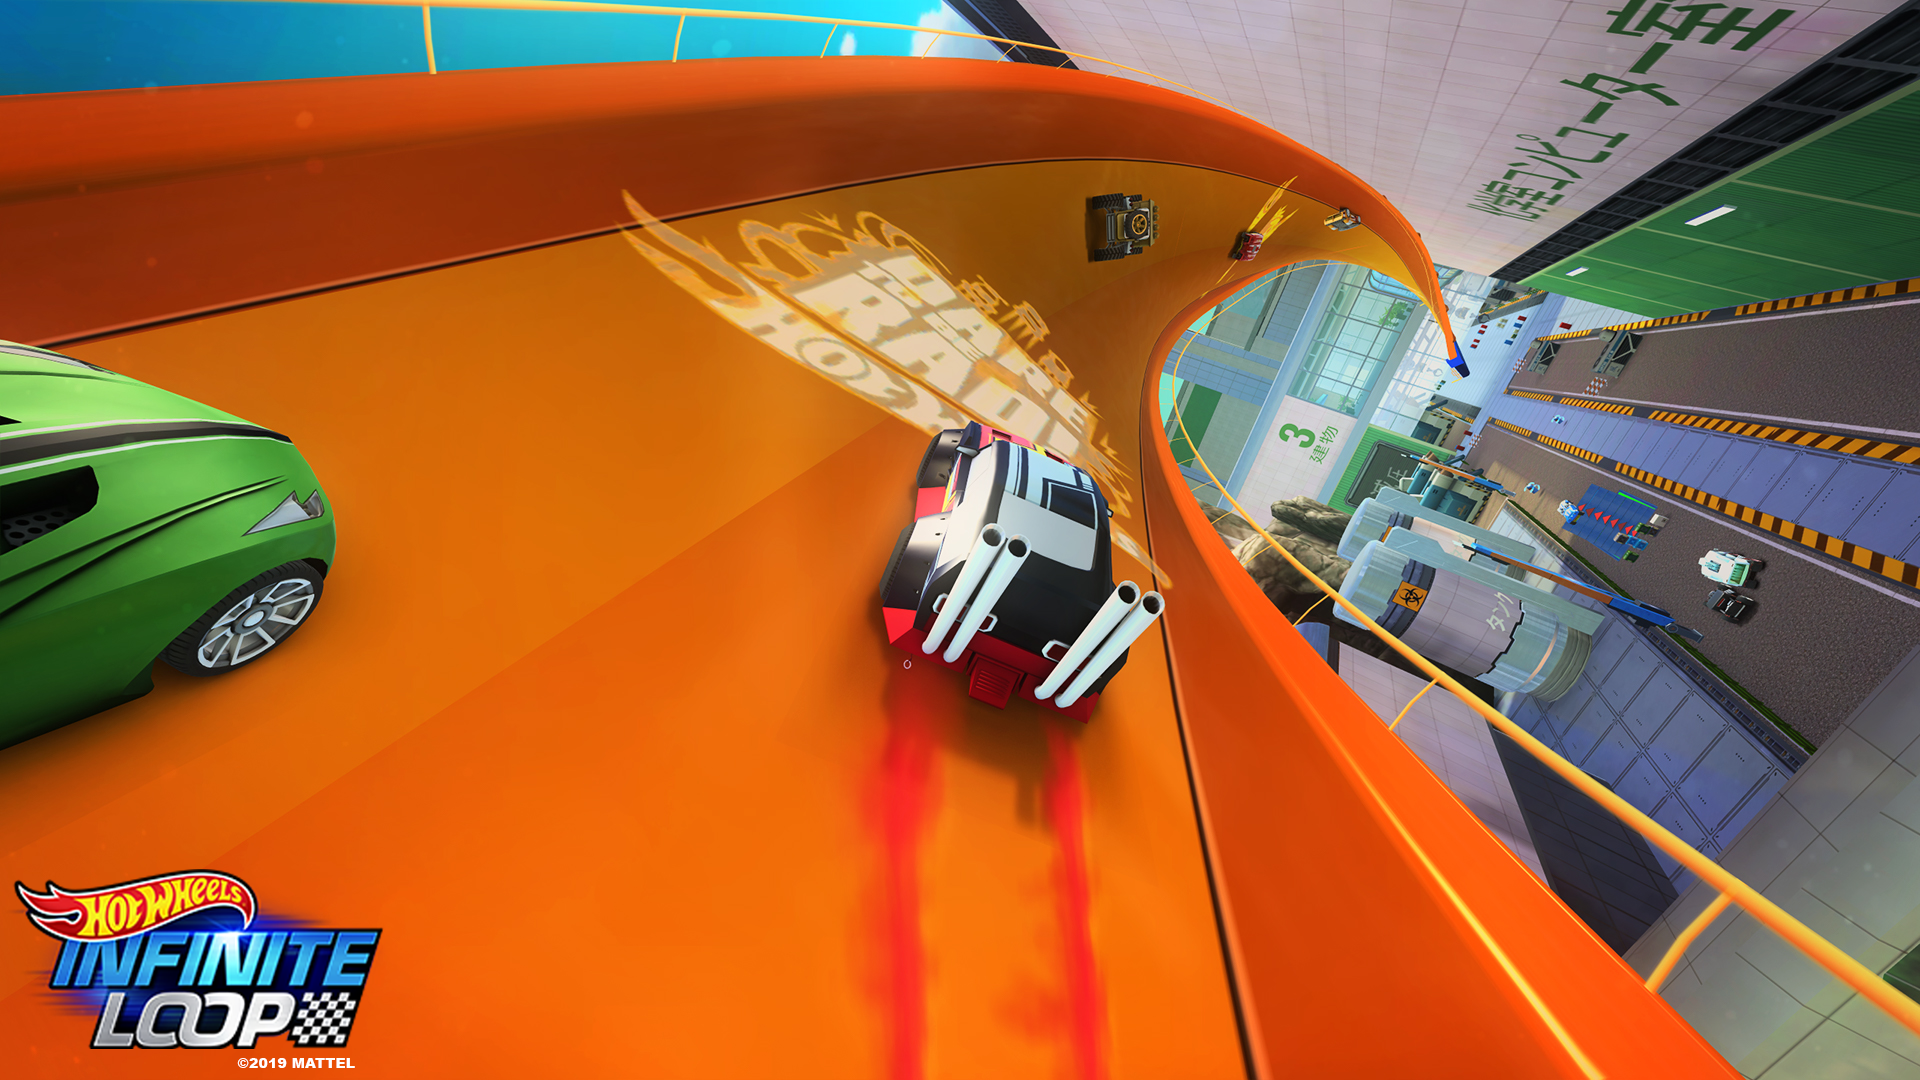 Mattel Revs Up HOT WHEELS Fun with 4 New Video Game Updates